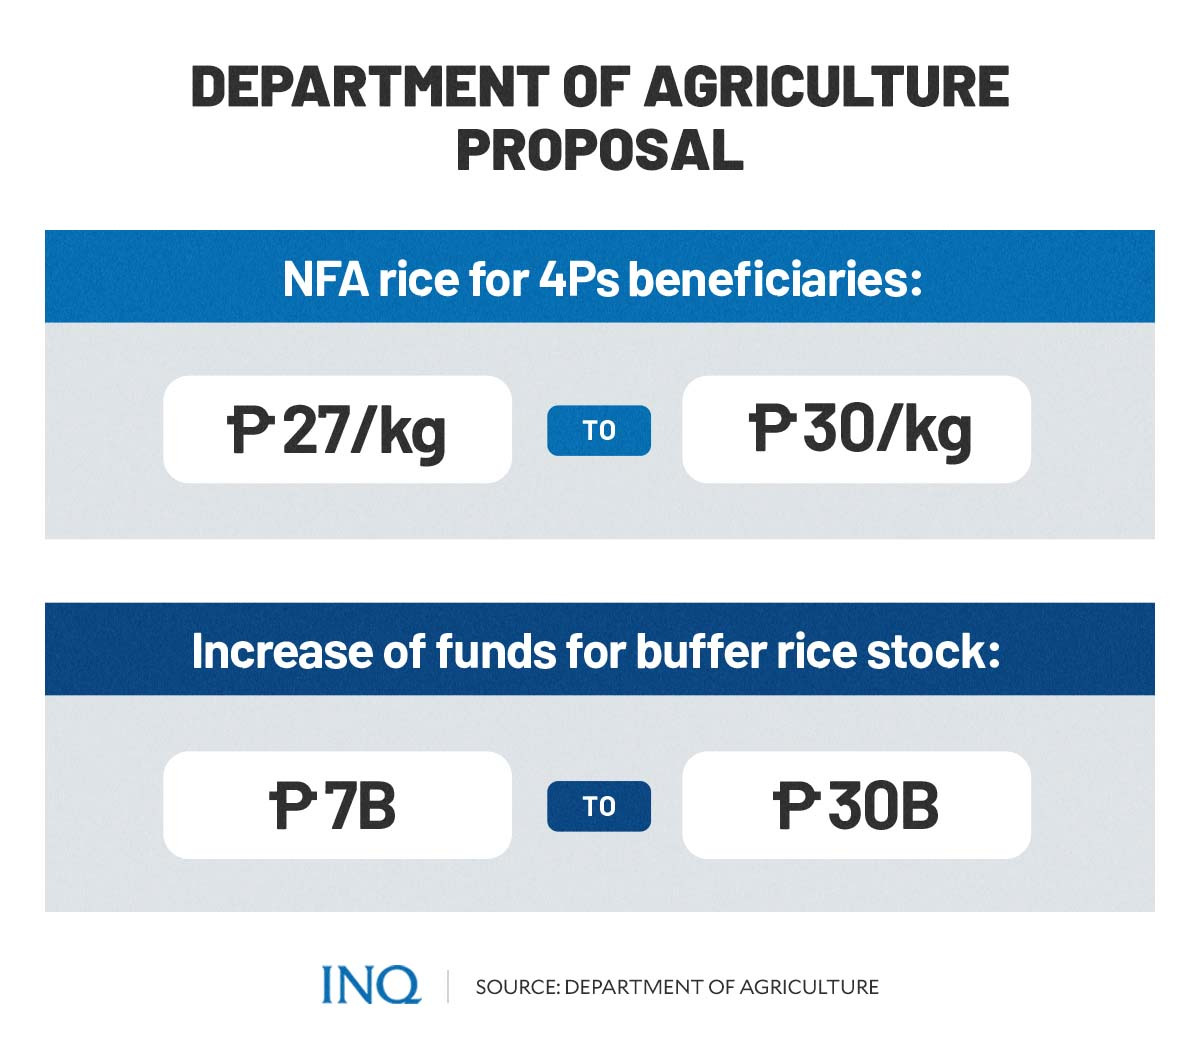 Department of Agriculture proposal